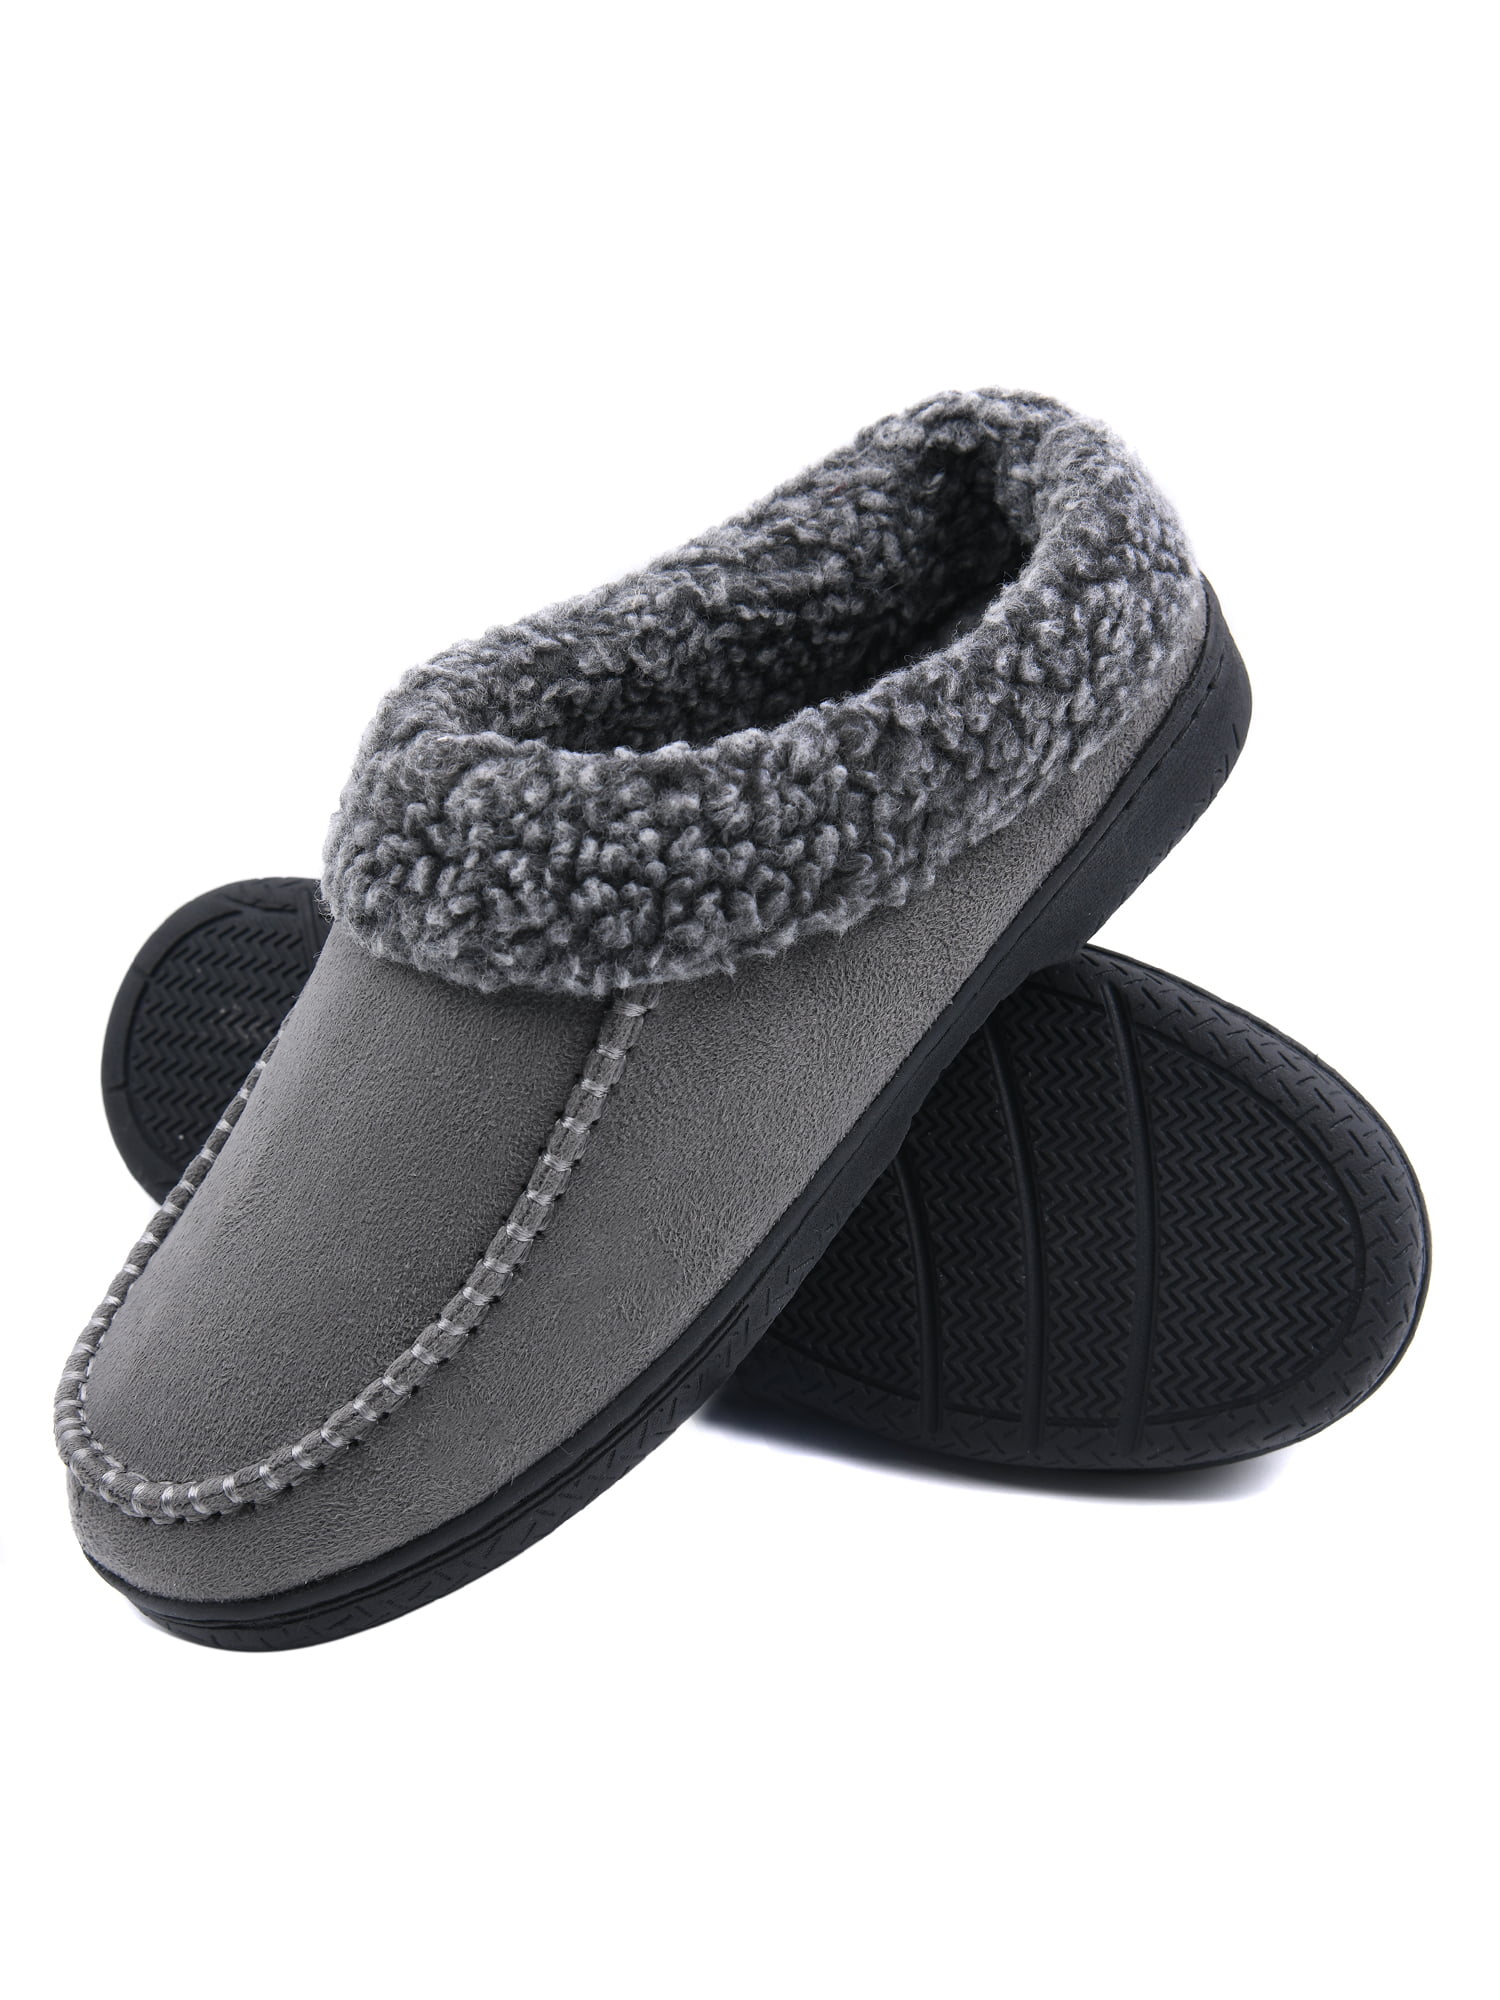 DL Men's-Moccasin-Slippers Fuzzy Microsuede House Slippers with Memory Foam Indoor/Outdoor Fluffy House Shoes 